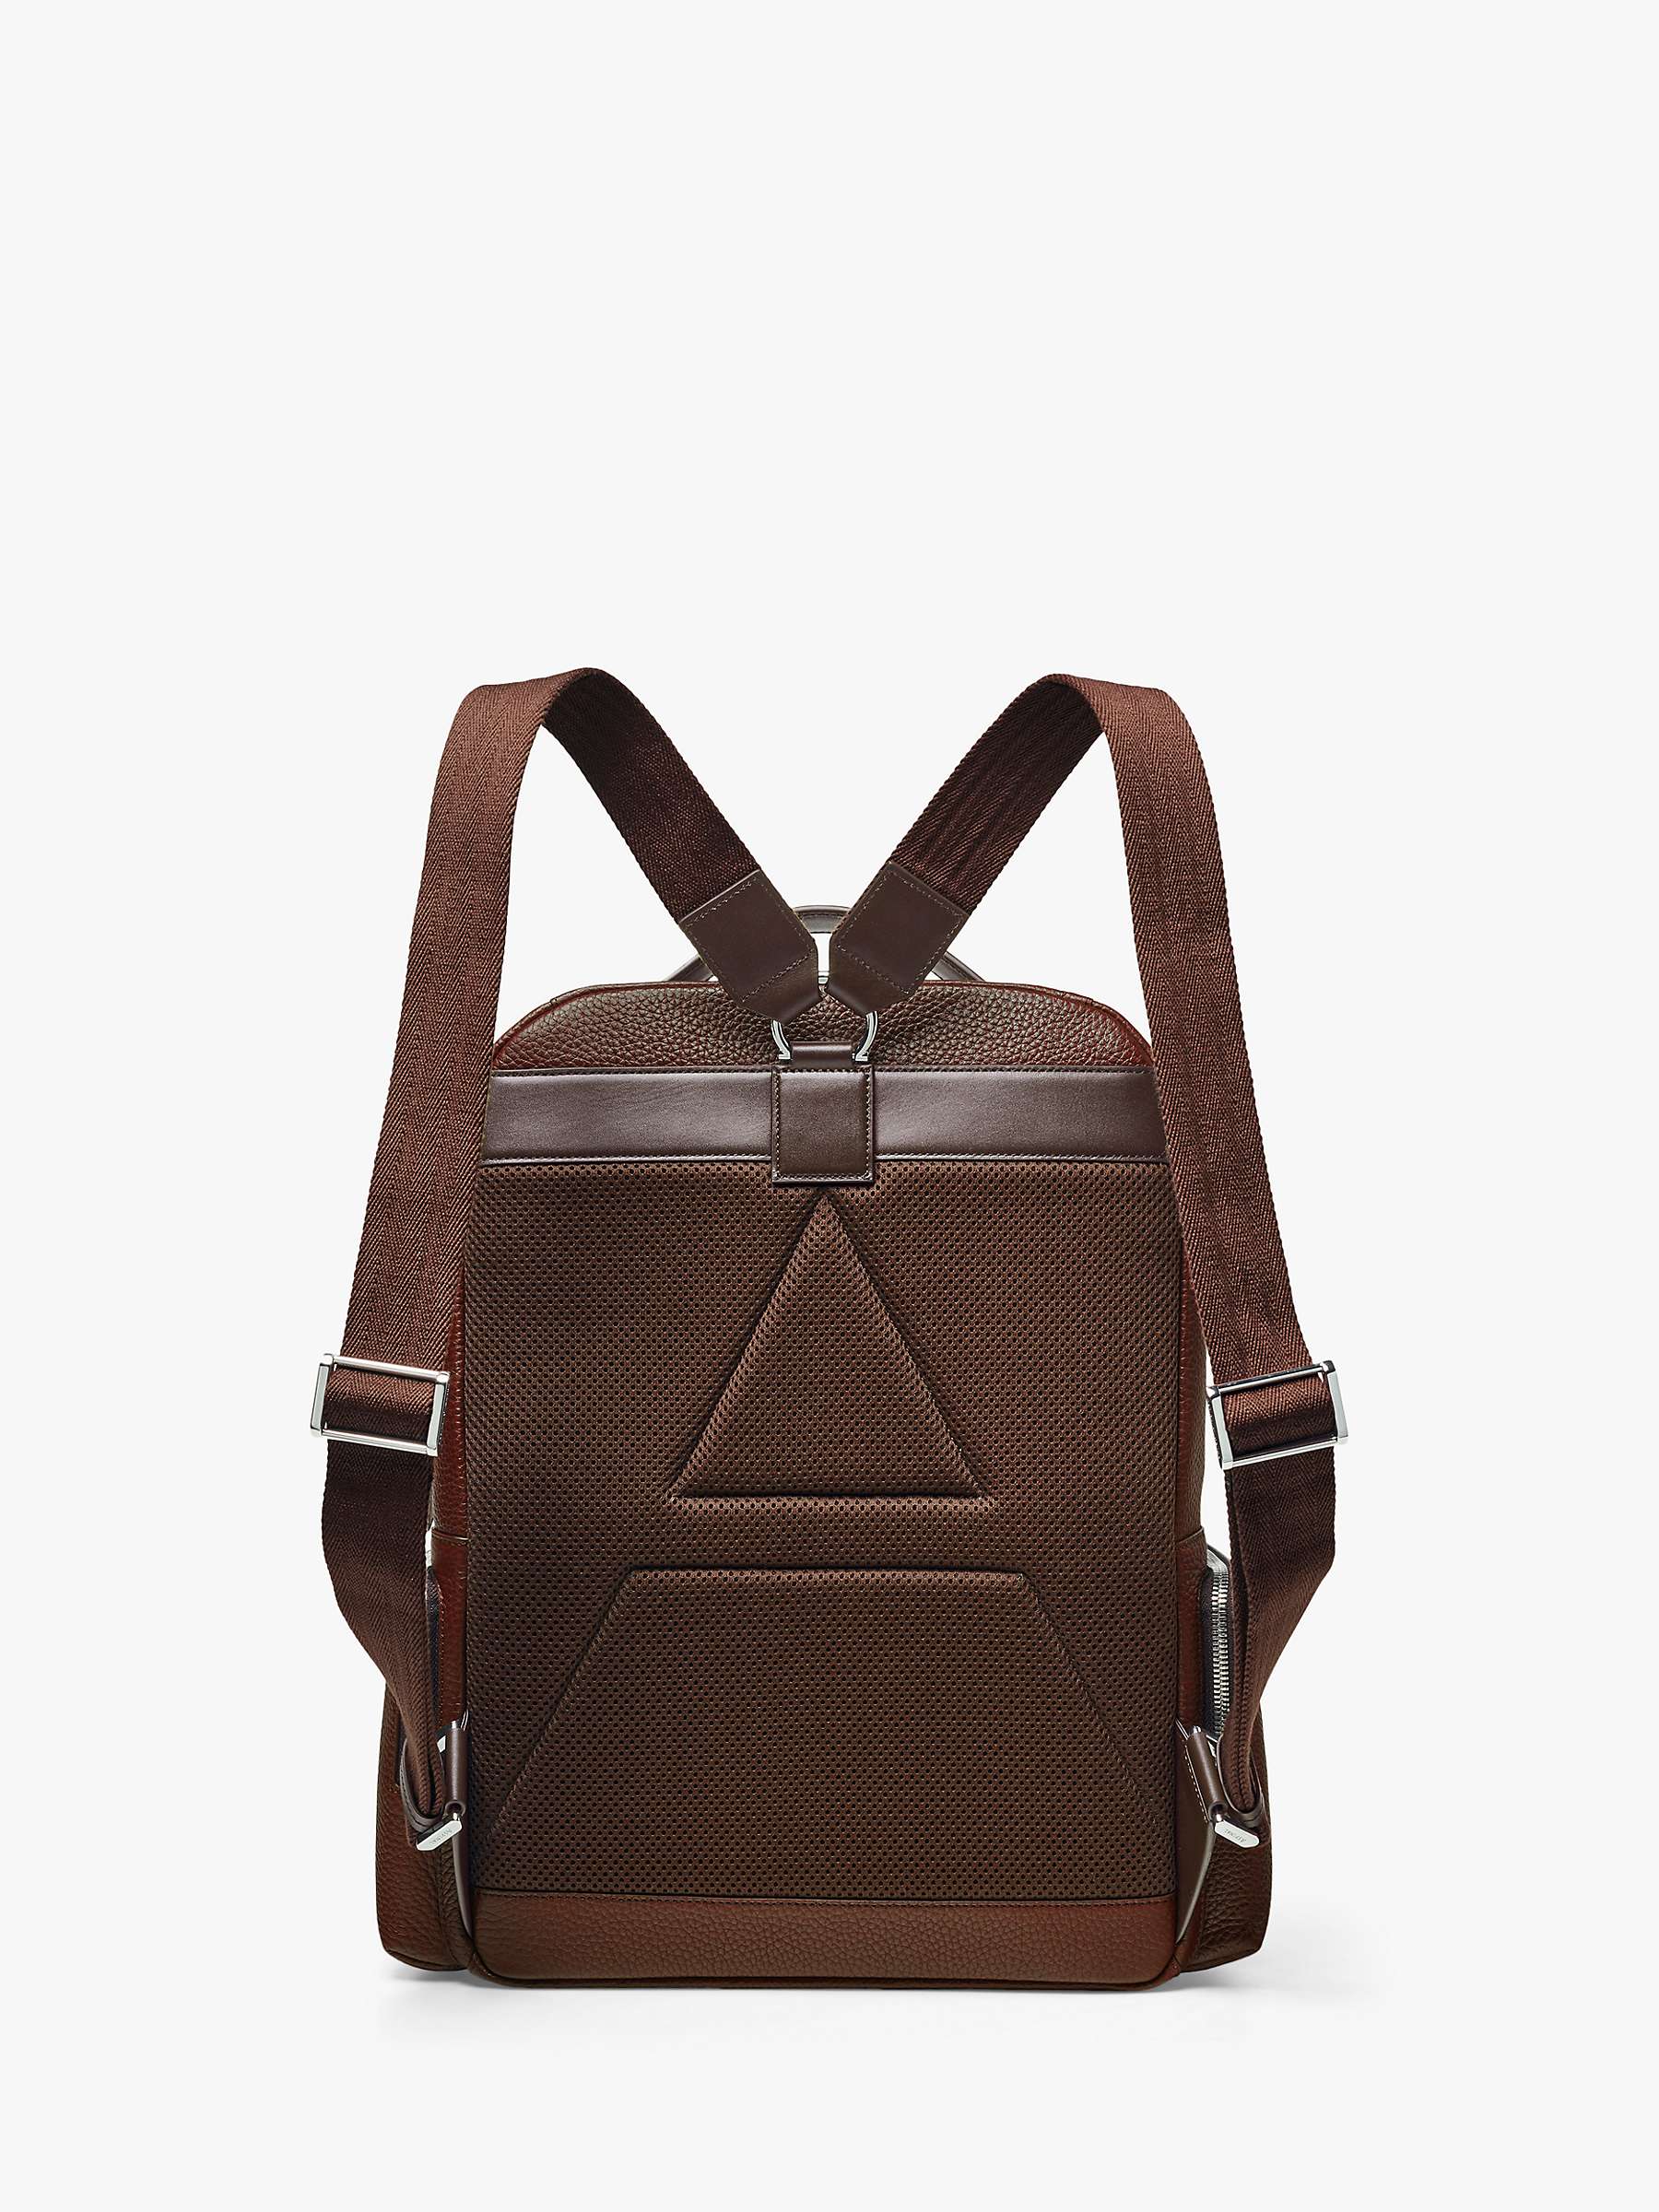 Buy Aspinal of London Reporter Zip Pebble Leather Backpack Online at johnlewis.com